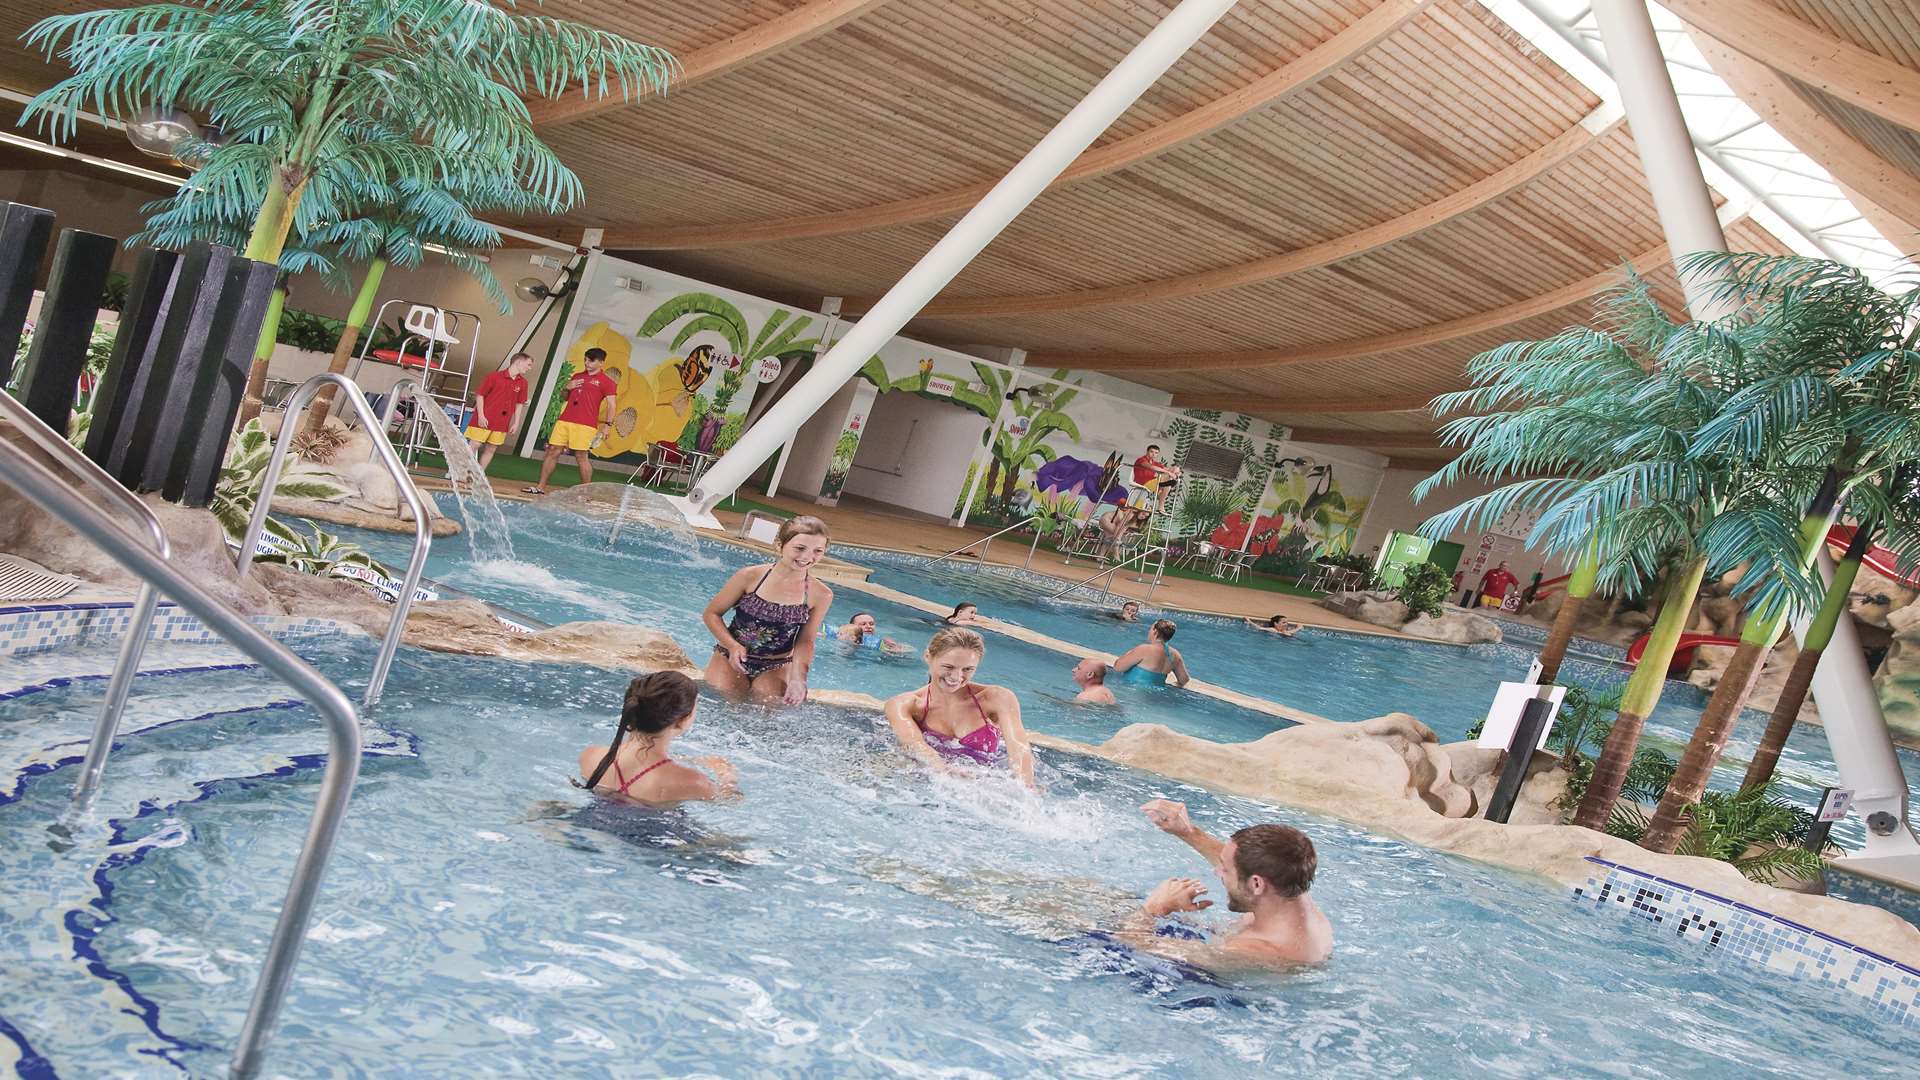 The pool at Vauxhall is perfect for families.